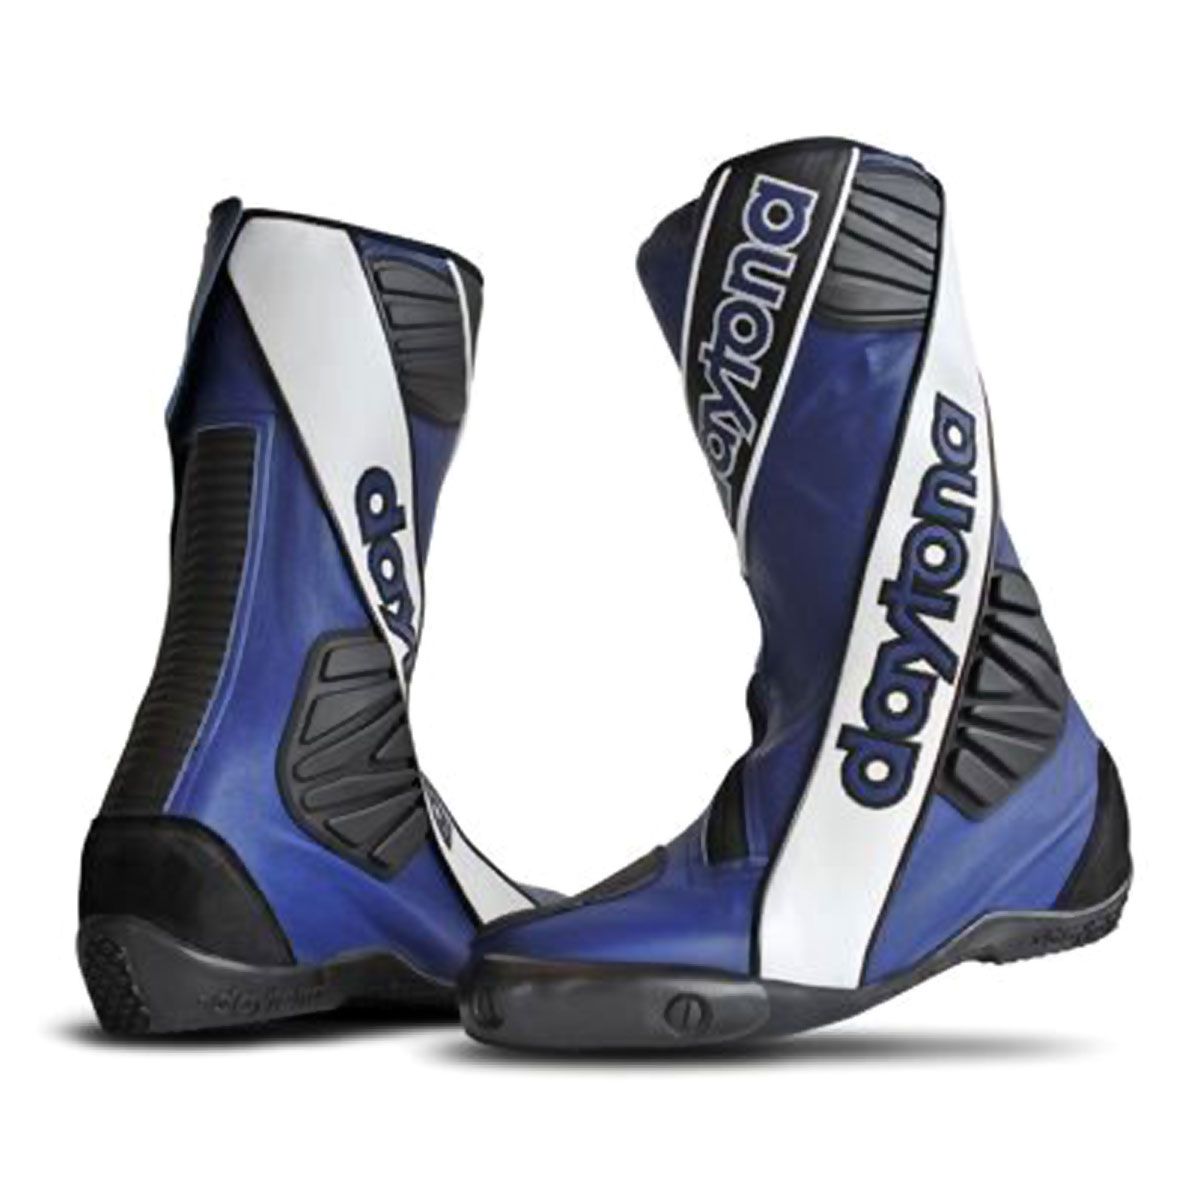 Daytona Boots for All Types of Motorbike Riders - Fast Free Delivery